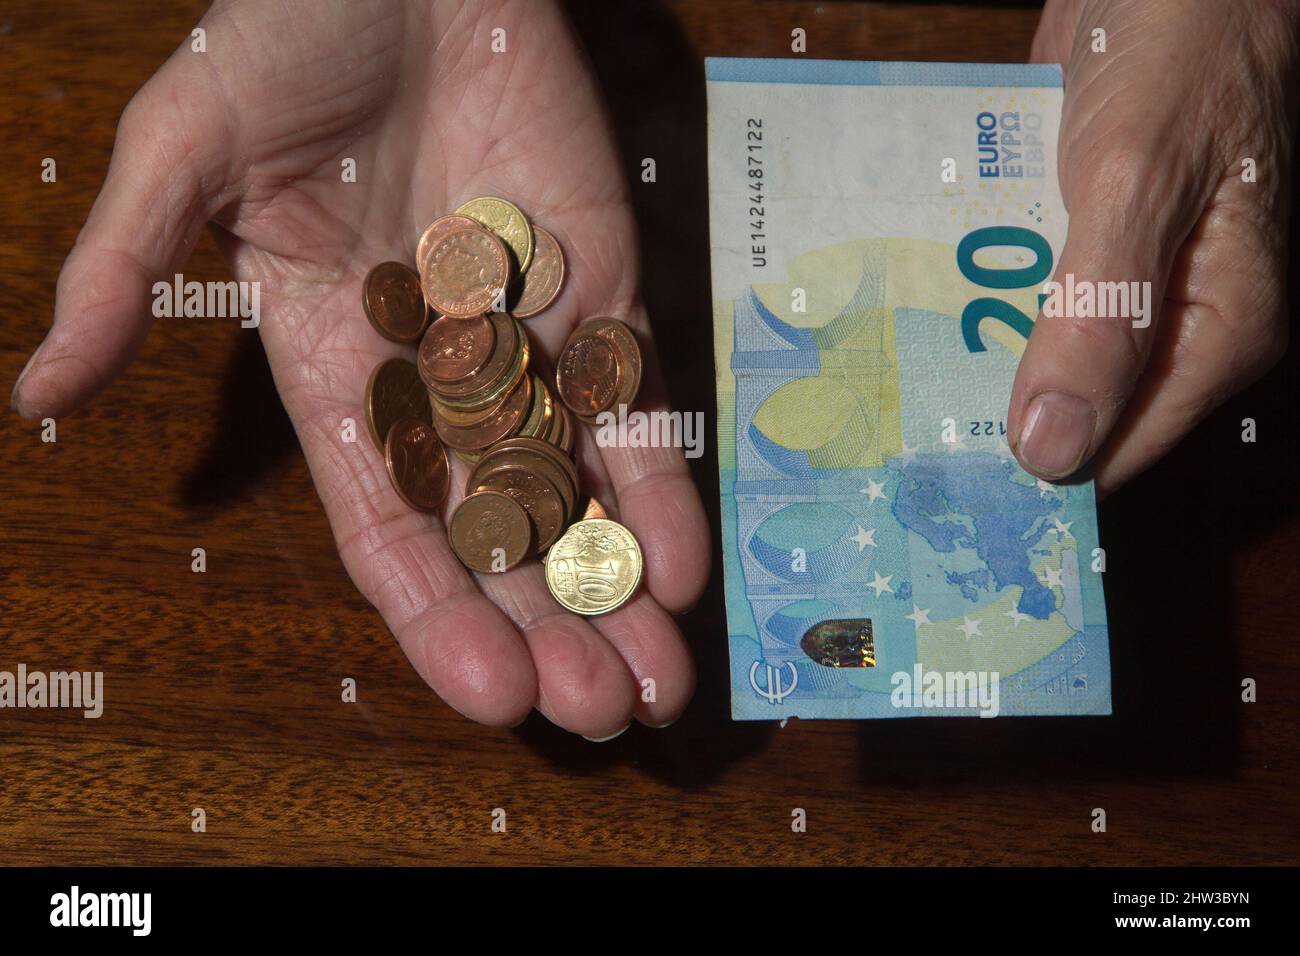 Wrinkled hands of elderly woman holding coins and bankbote Stock Photo